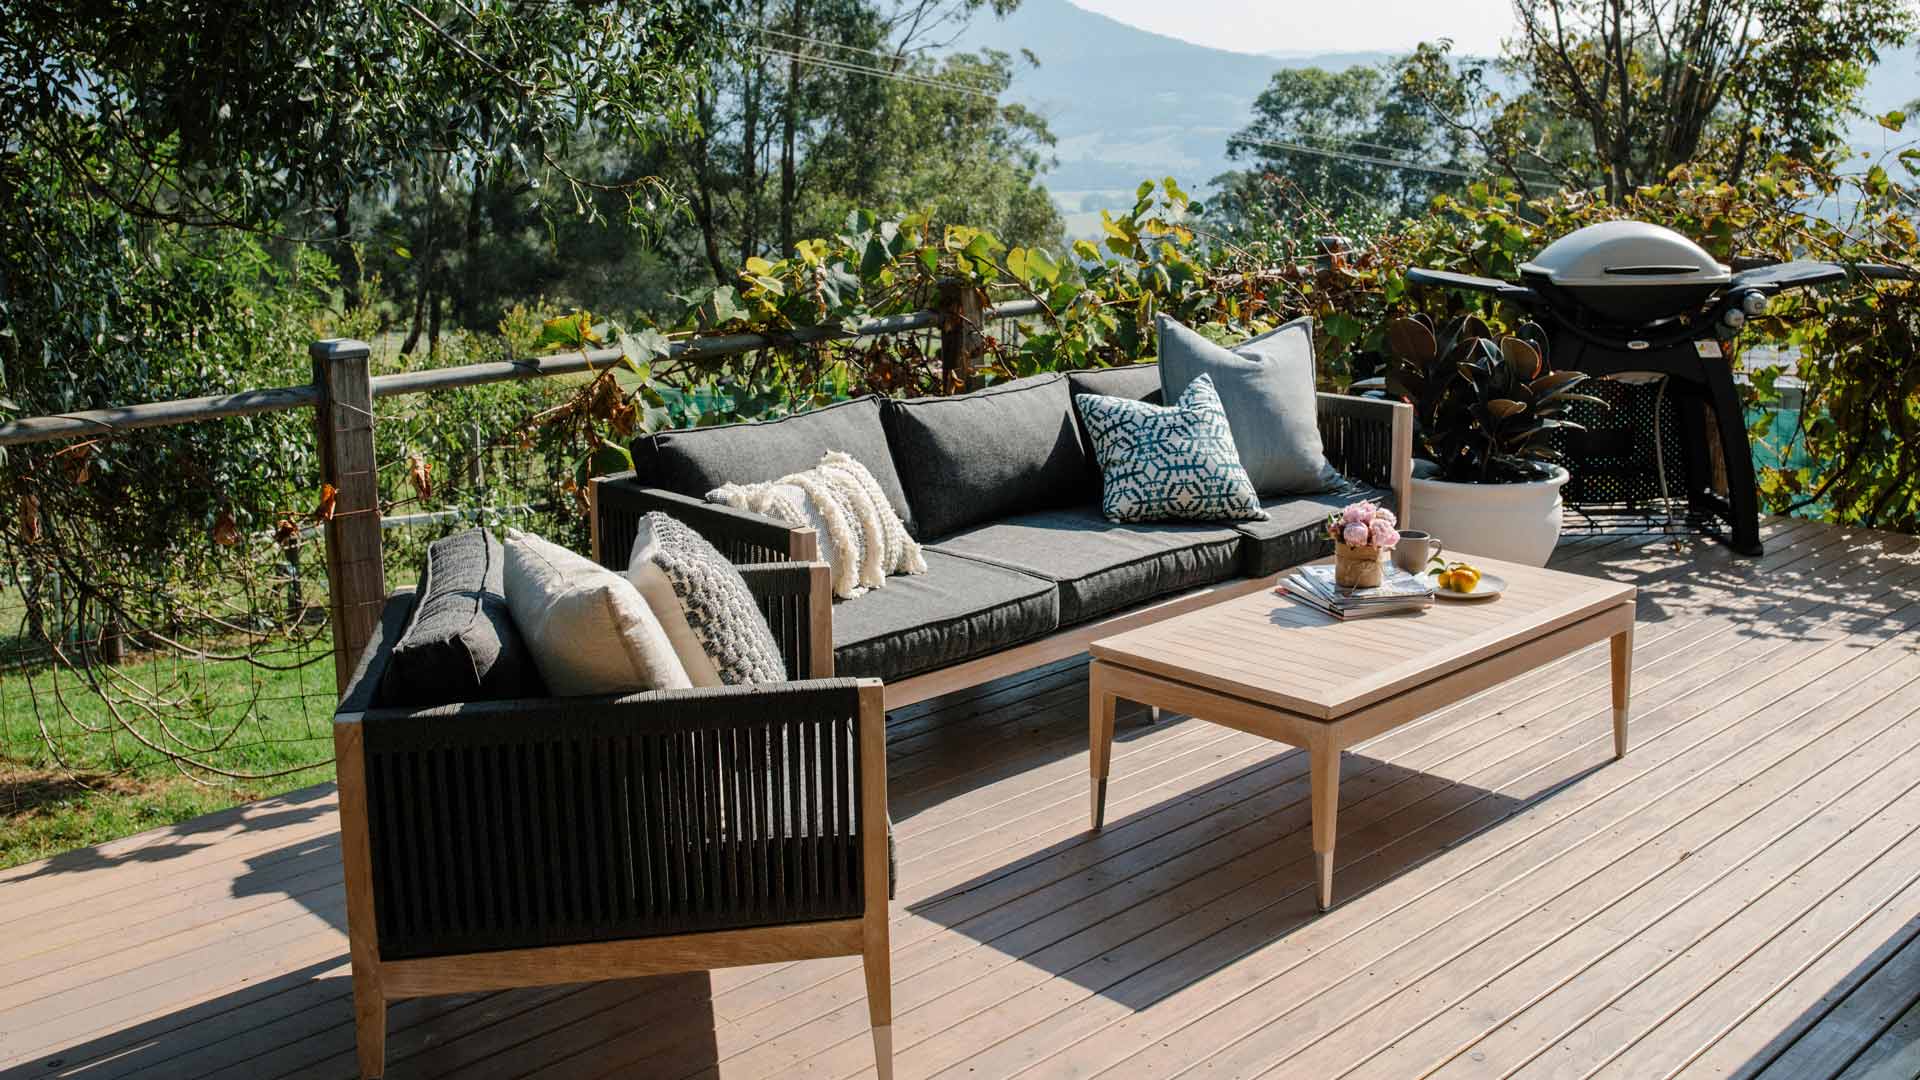 Jamberoo Valley Farm Is the South Coast's Luxurious New Farm-Stay with Its Own Outdoor Hot Tub